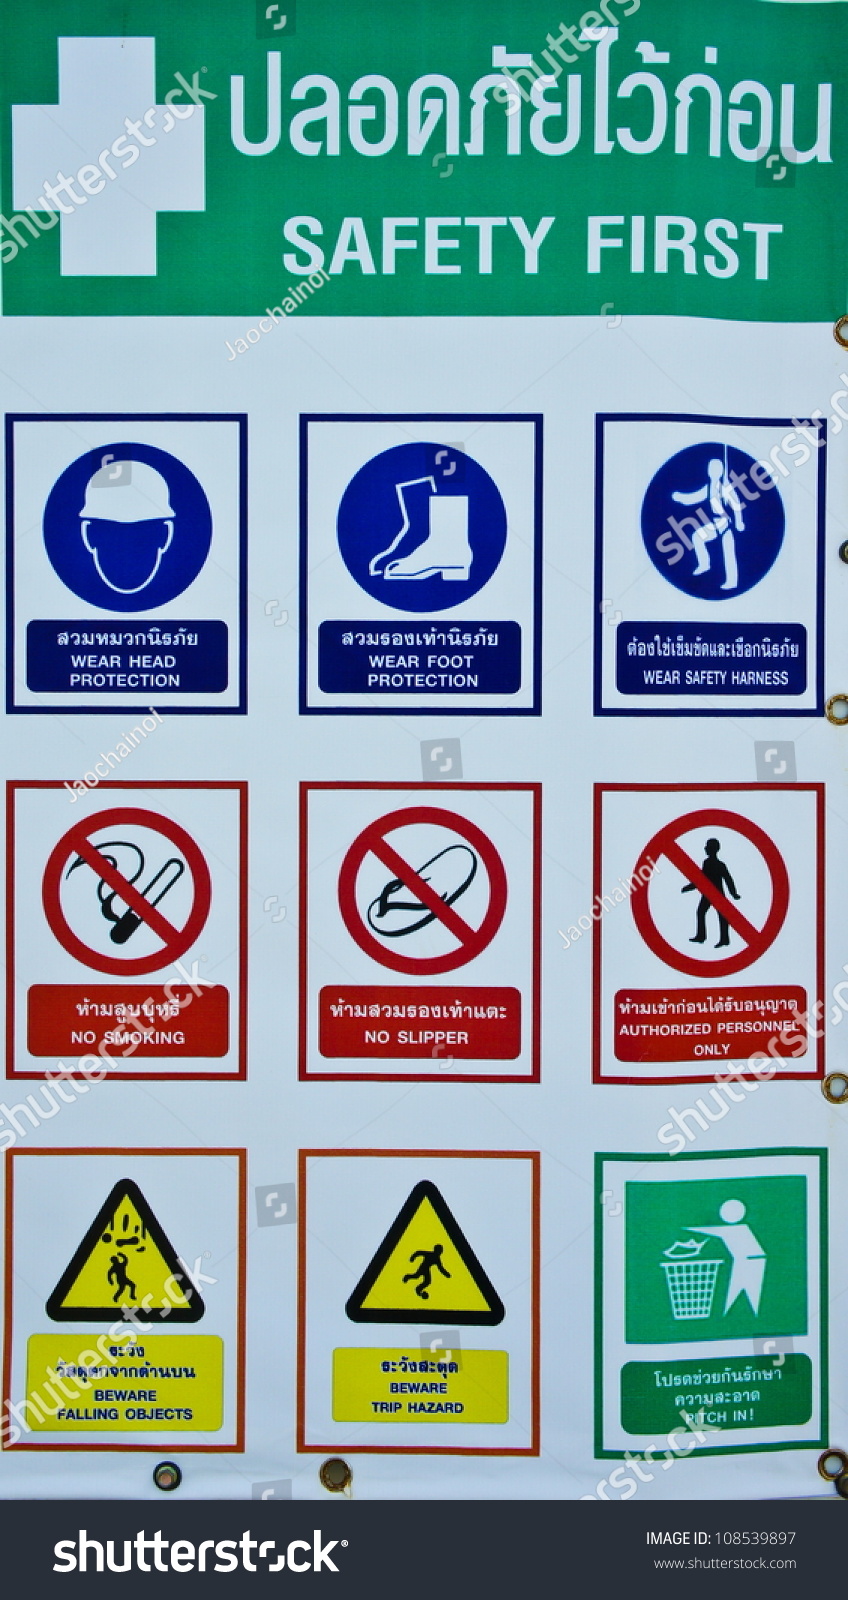 Construction/Building Site Safety Sign